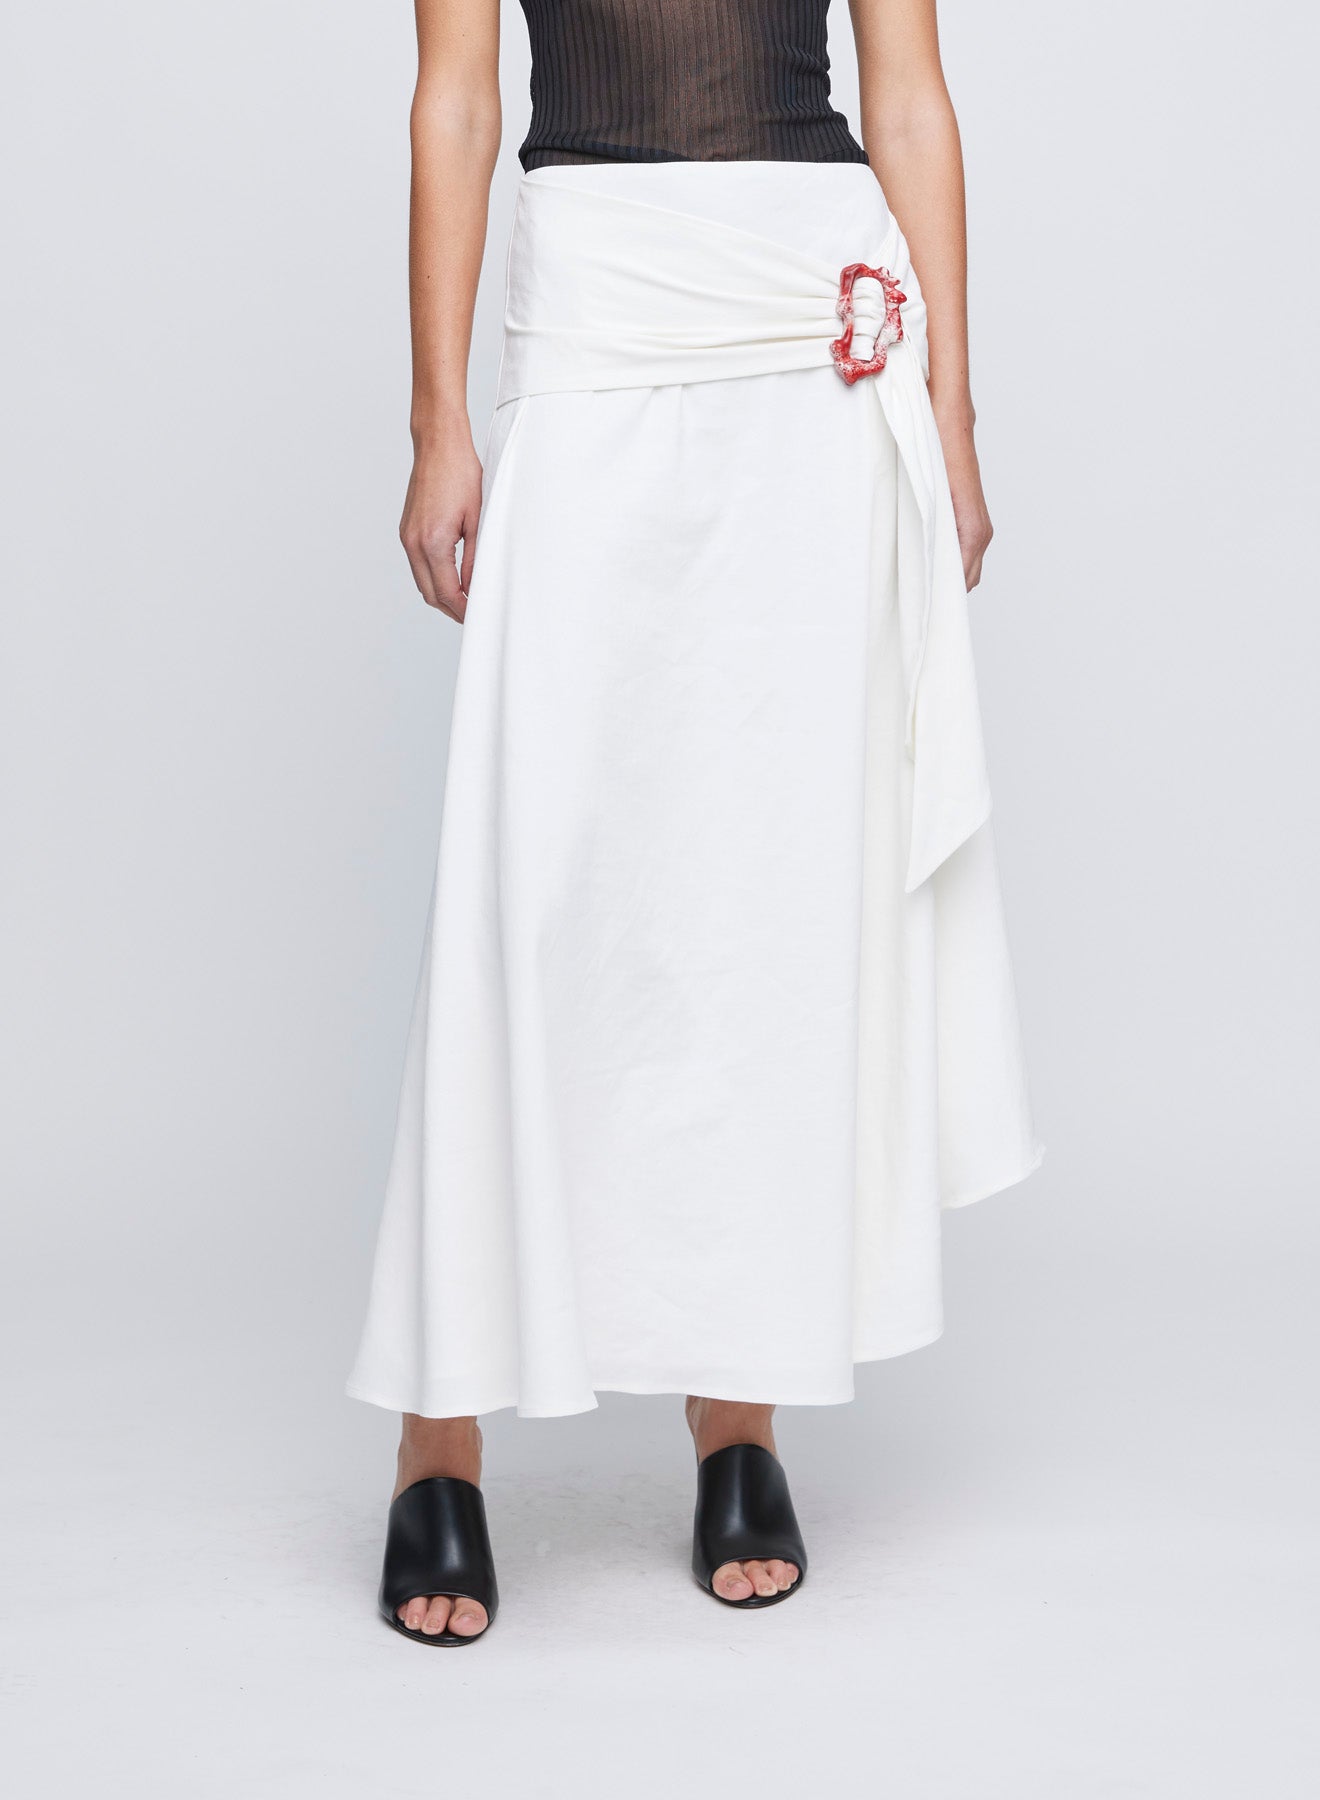 The ANNA QUAN Ingrid Skirt in Ivory Linen an asymmetrical midi style with an adjustable tie and textured buckle at the hip for a point of difference.